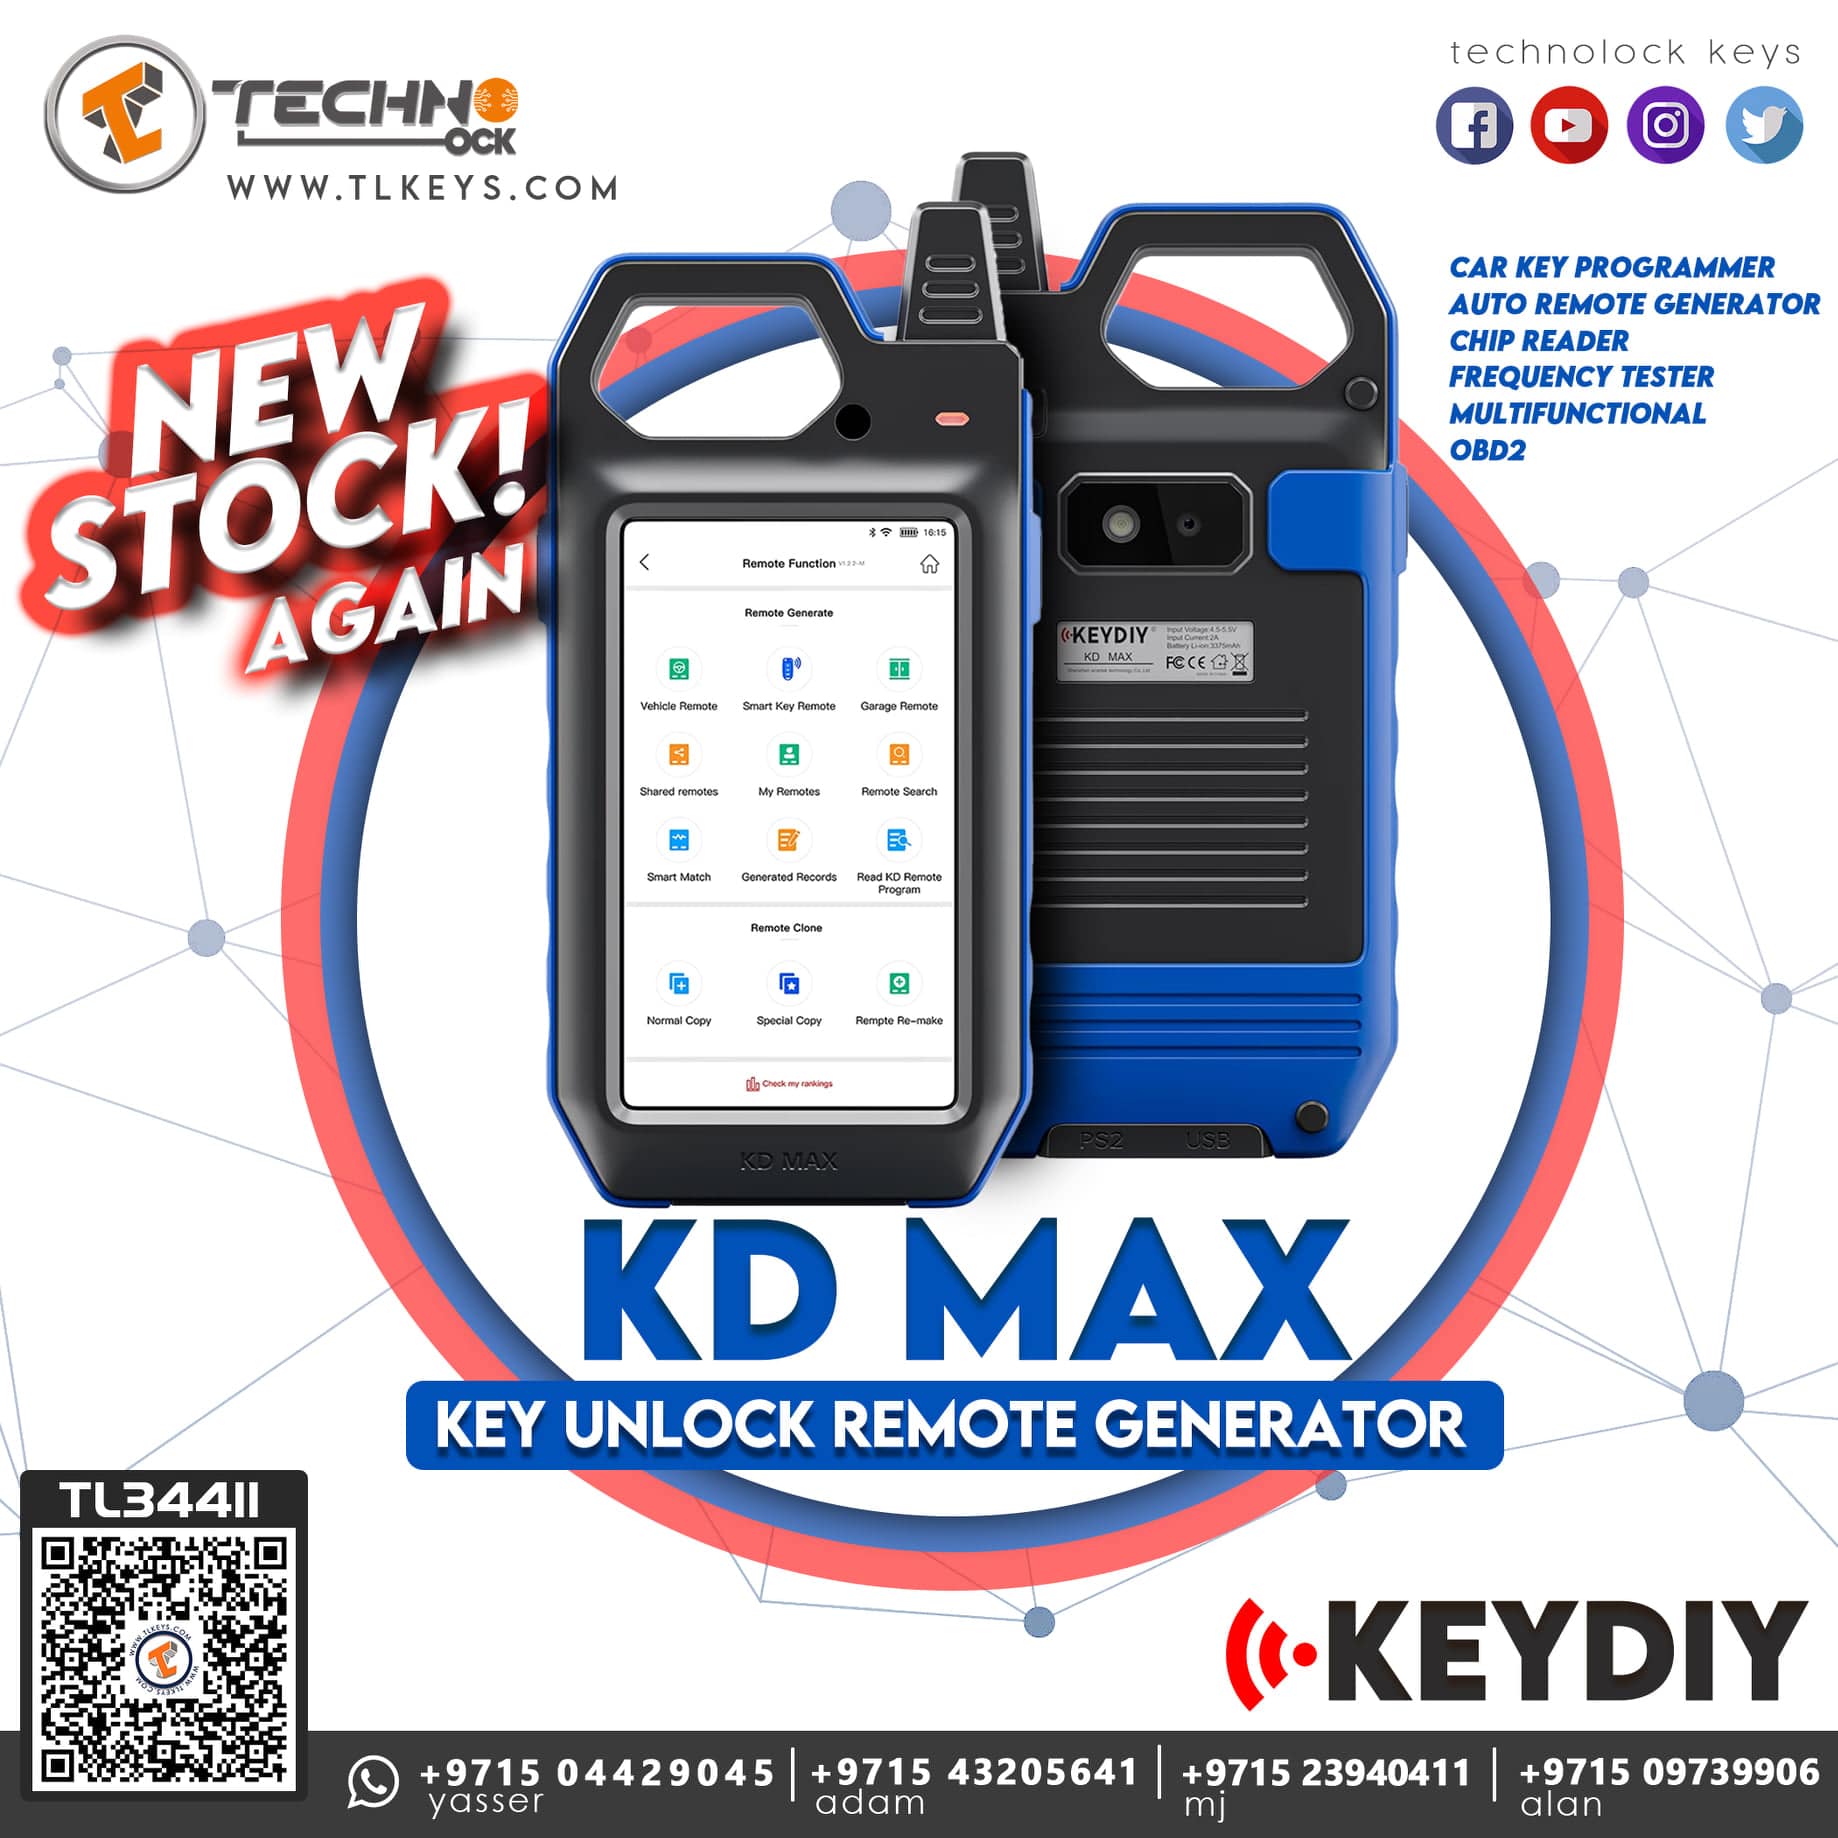  Chip Reader / Frequency Tester Mutil-functional Kd Best Key Max